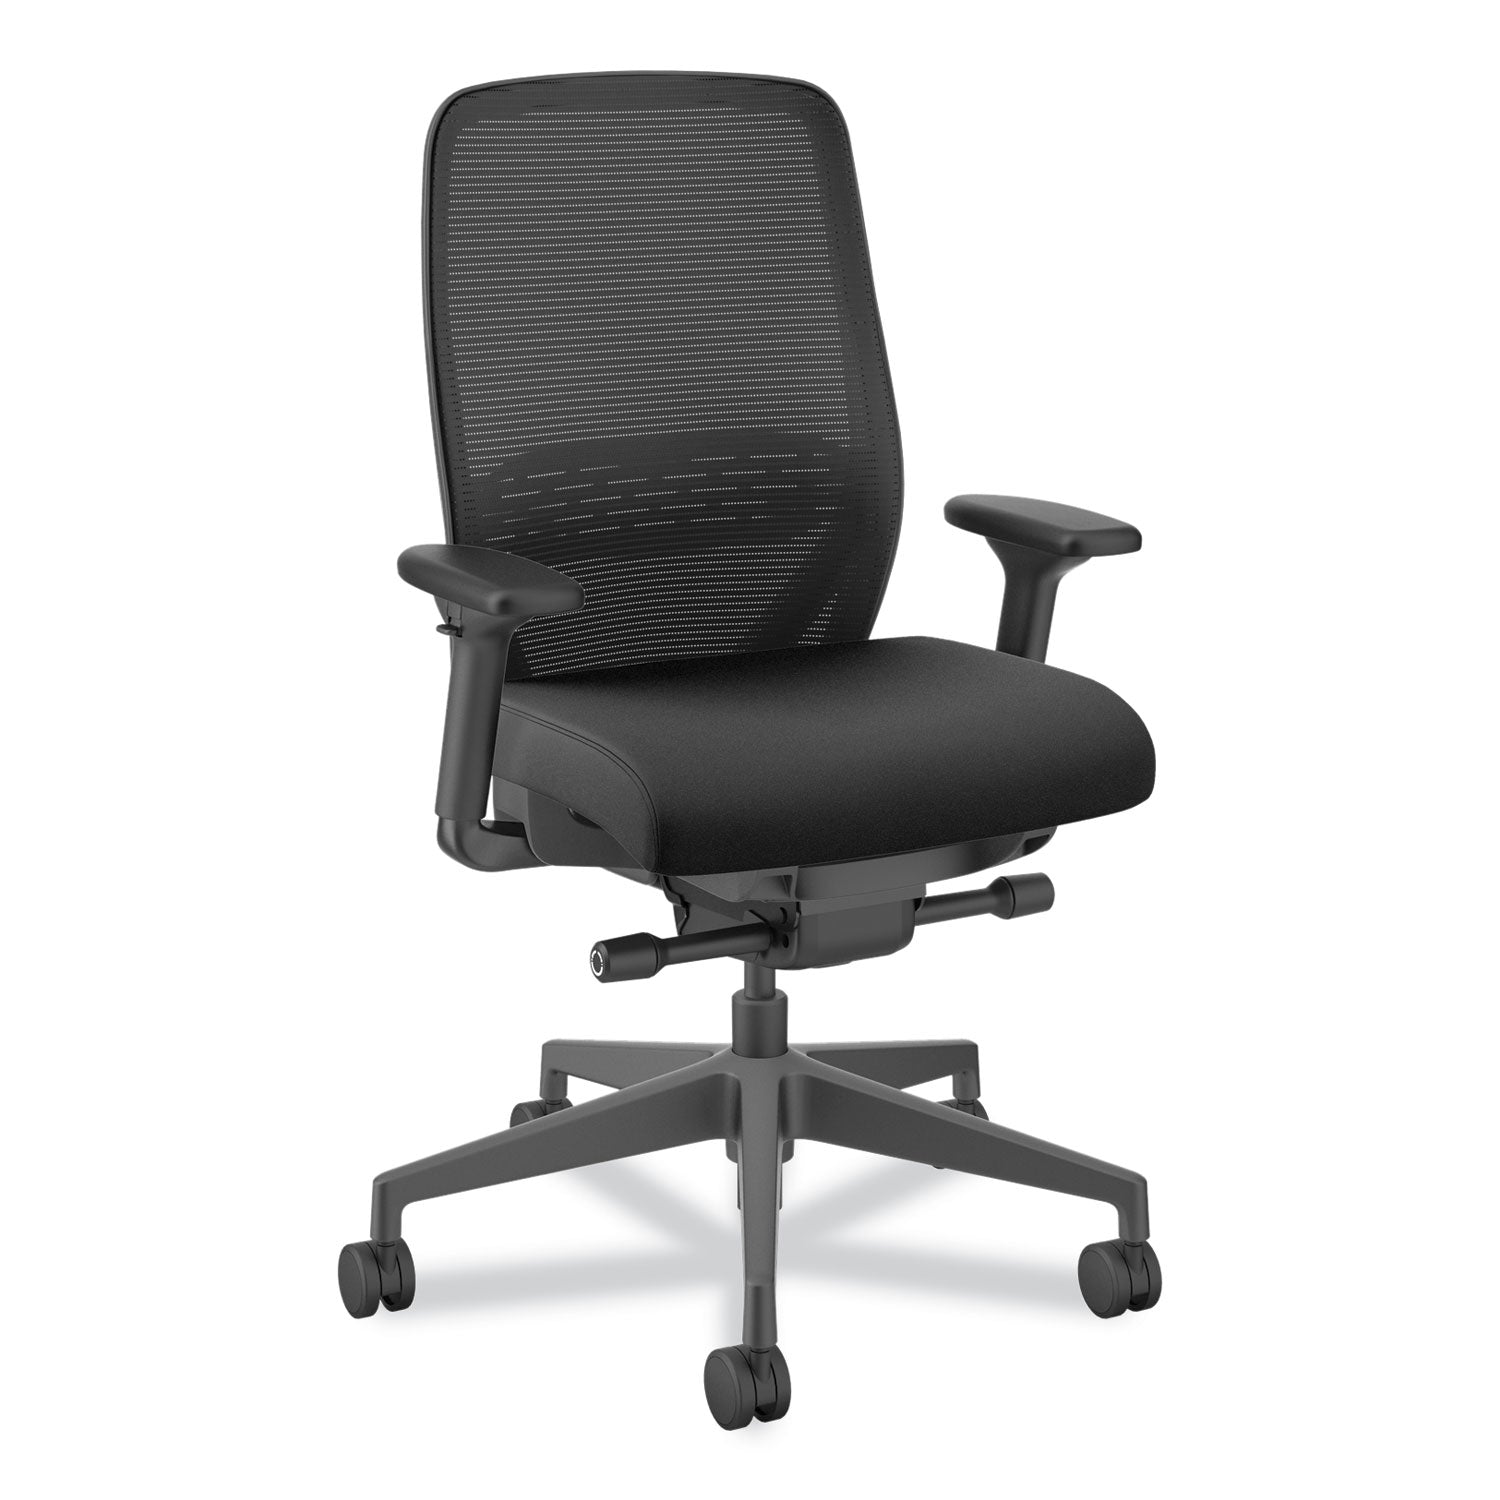 nucleus-series-recharge-task-chair-supports-up-to-300-lb-1663-to-2113-seat-height-black-seat-back-black-base_honnr12samc10bt - 1